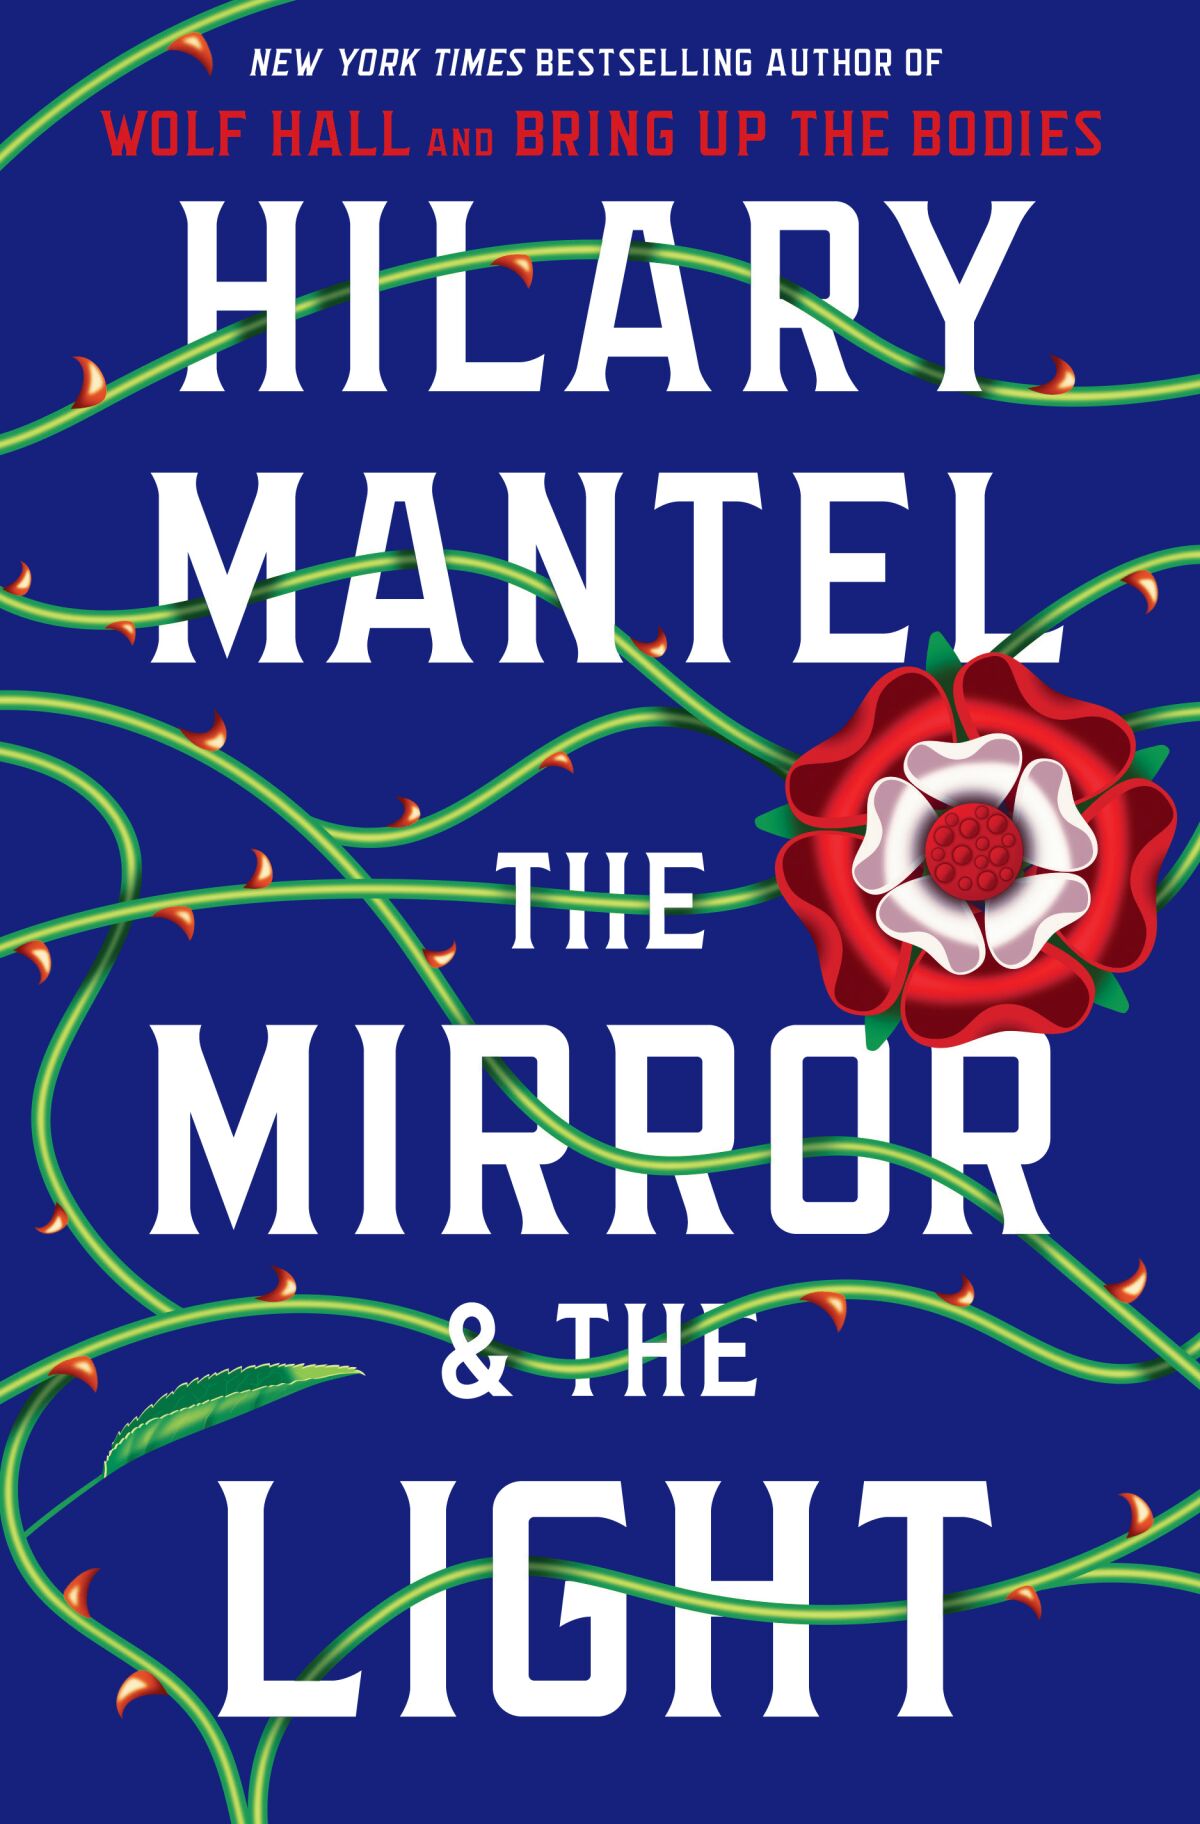 A book jacket for Hilary Mantel's "The Mirror and the Light." 